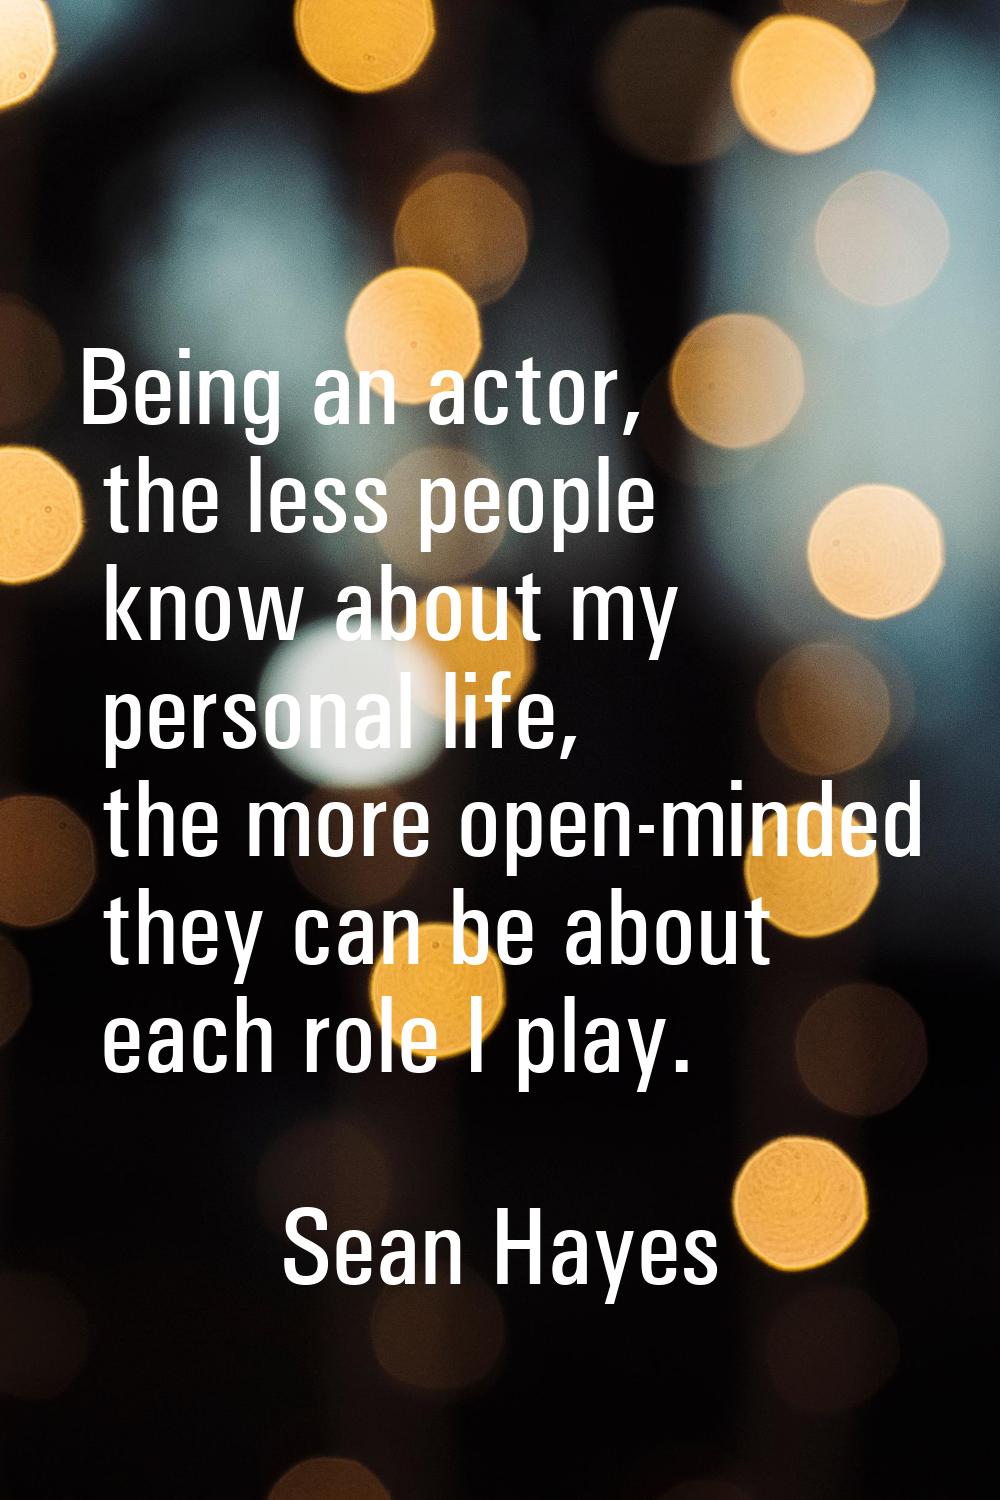 Being an actor, the less people know about my personal life, the more open-minded they can be about